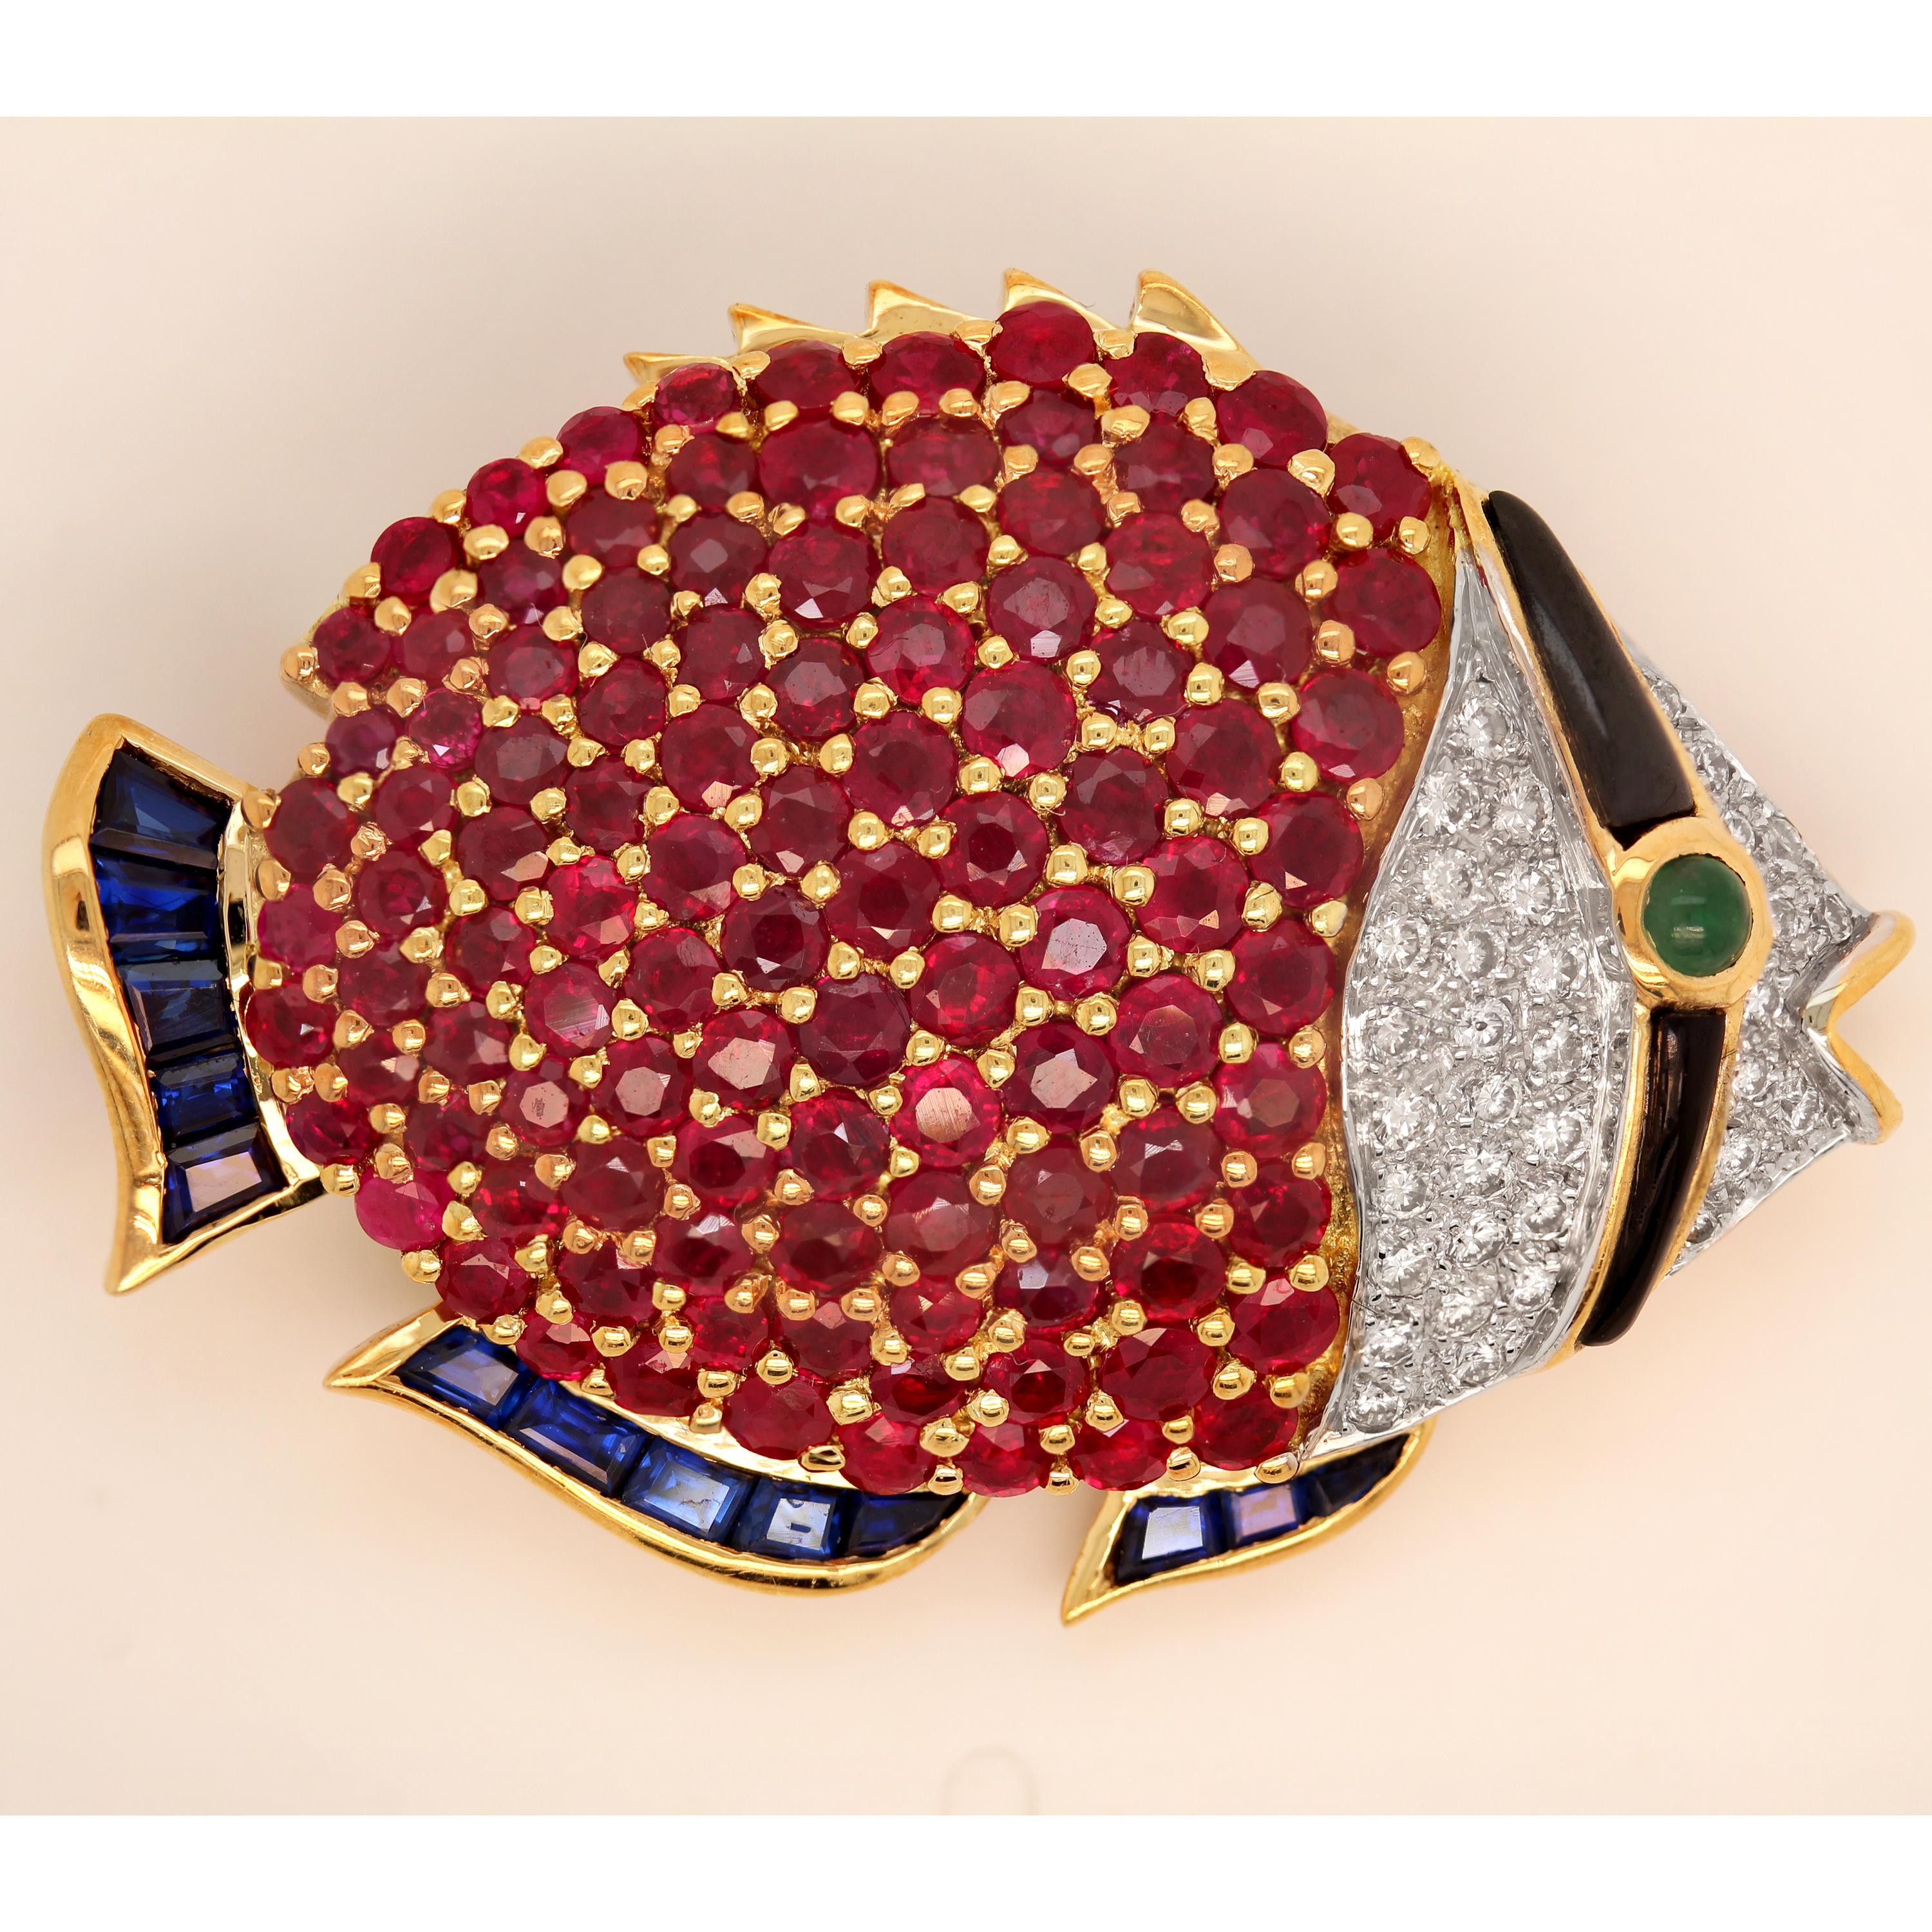 Round Cut 18K Gold Pigeon Blood Ruby Diamonds Emerald Blue Sapphires Large Fish Brooch Pin For Sale